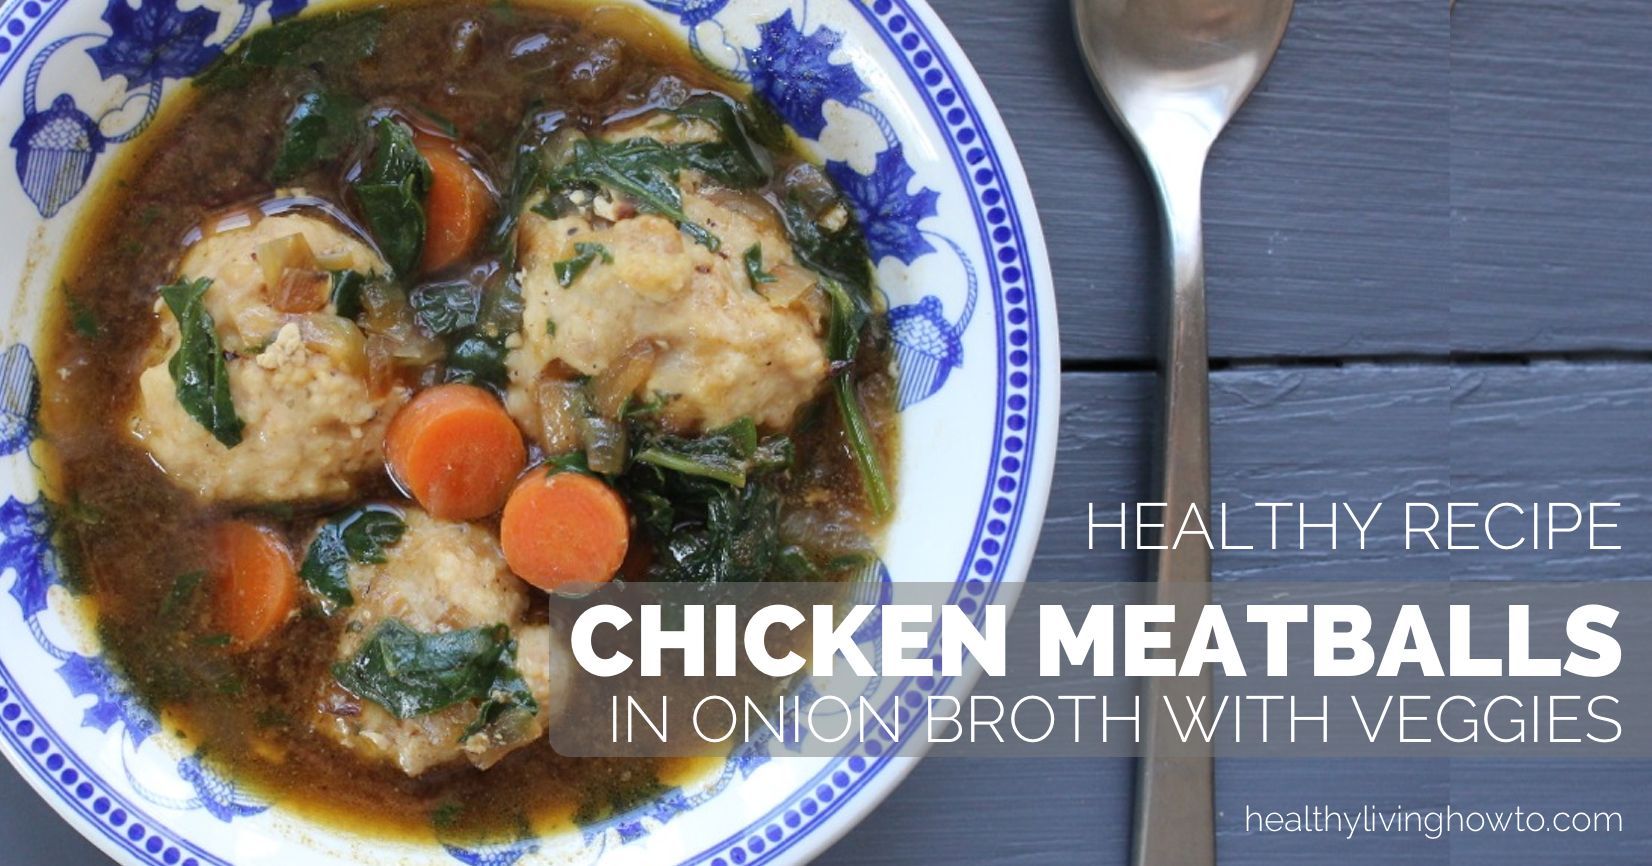 Healthy Recipe Chicken Meatballs in Onion Broth with Vegetables | healthylivinghowto.com